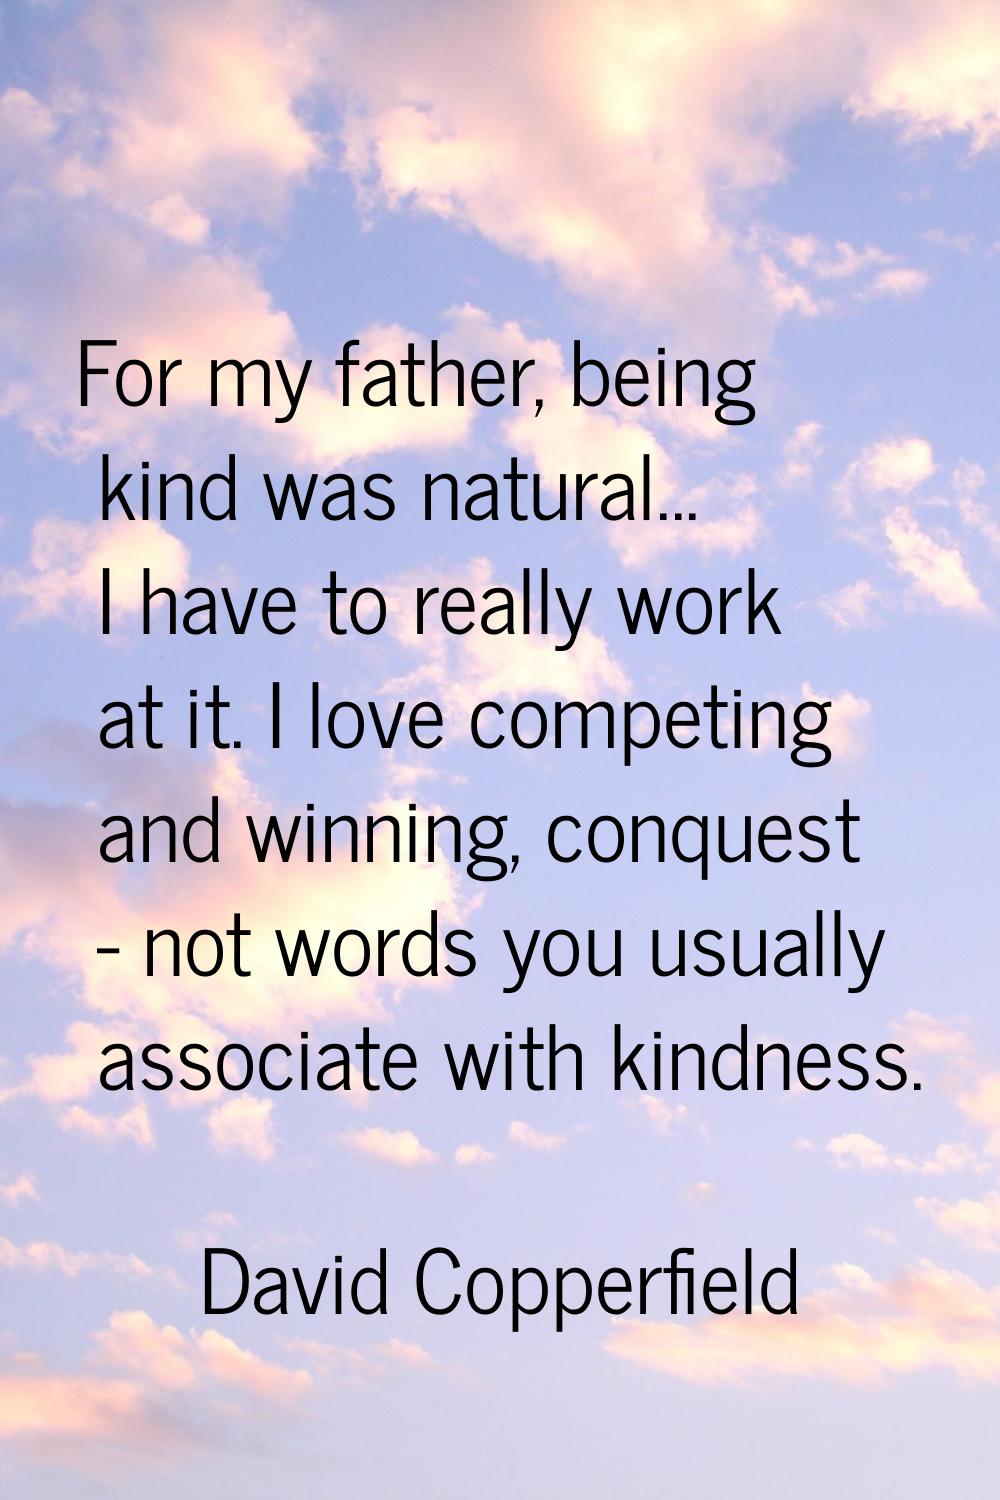 For my father, being kind was natural... I have to really work at it. I love competing and winning,